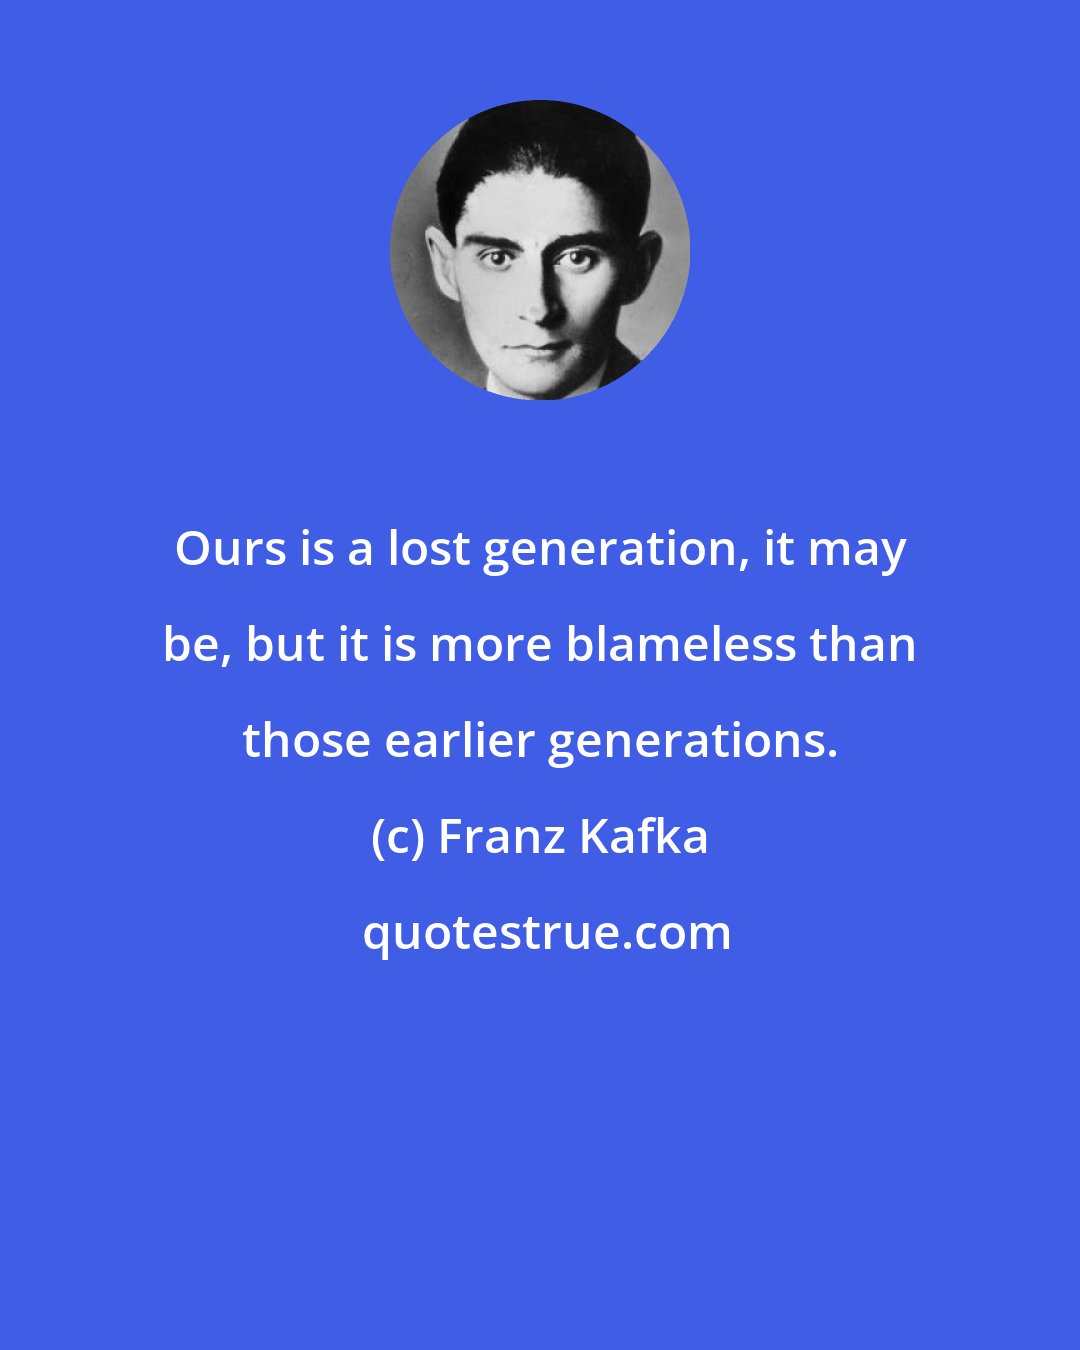 Franz Kafka: Ours is a lost generation, it may be, but it is more blameless than those earlier generations.